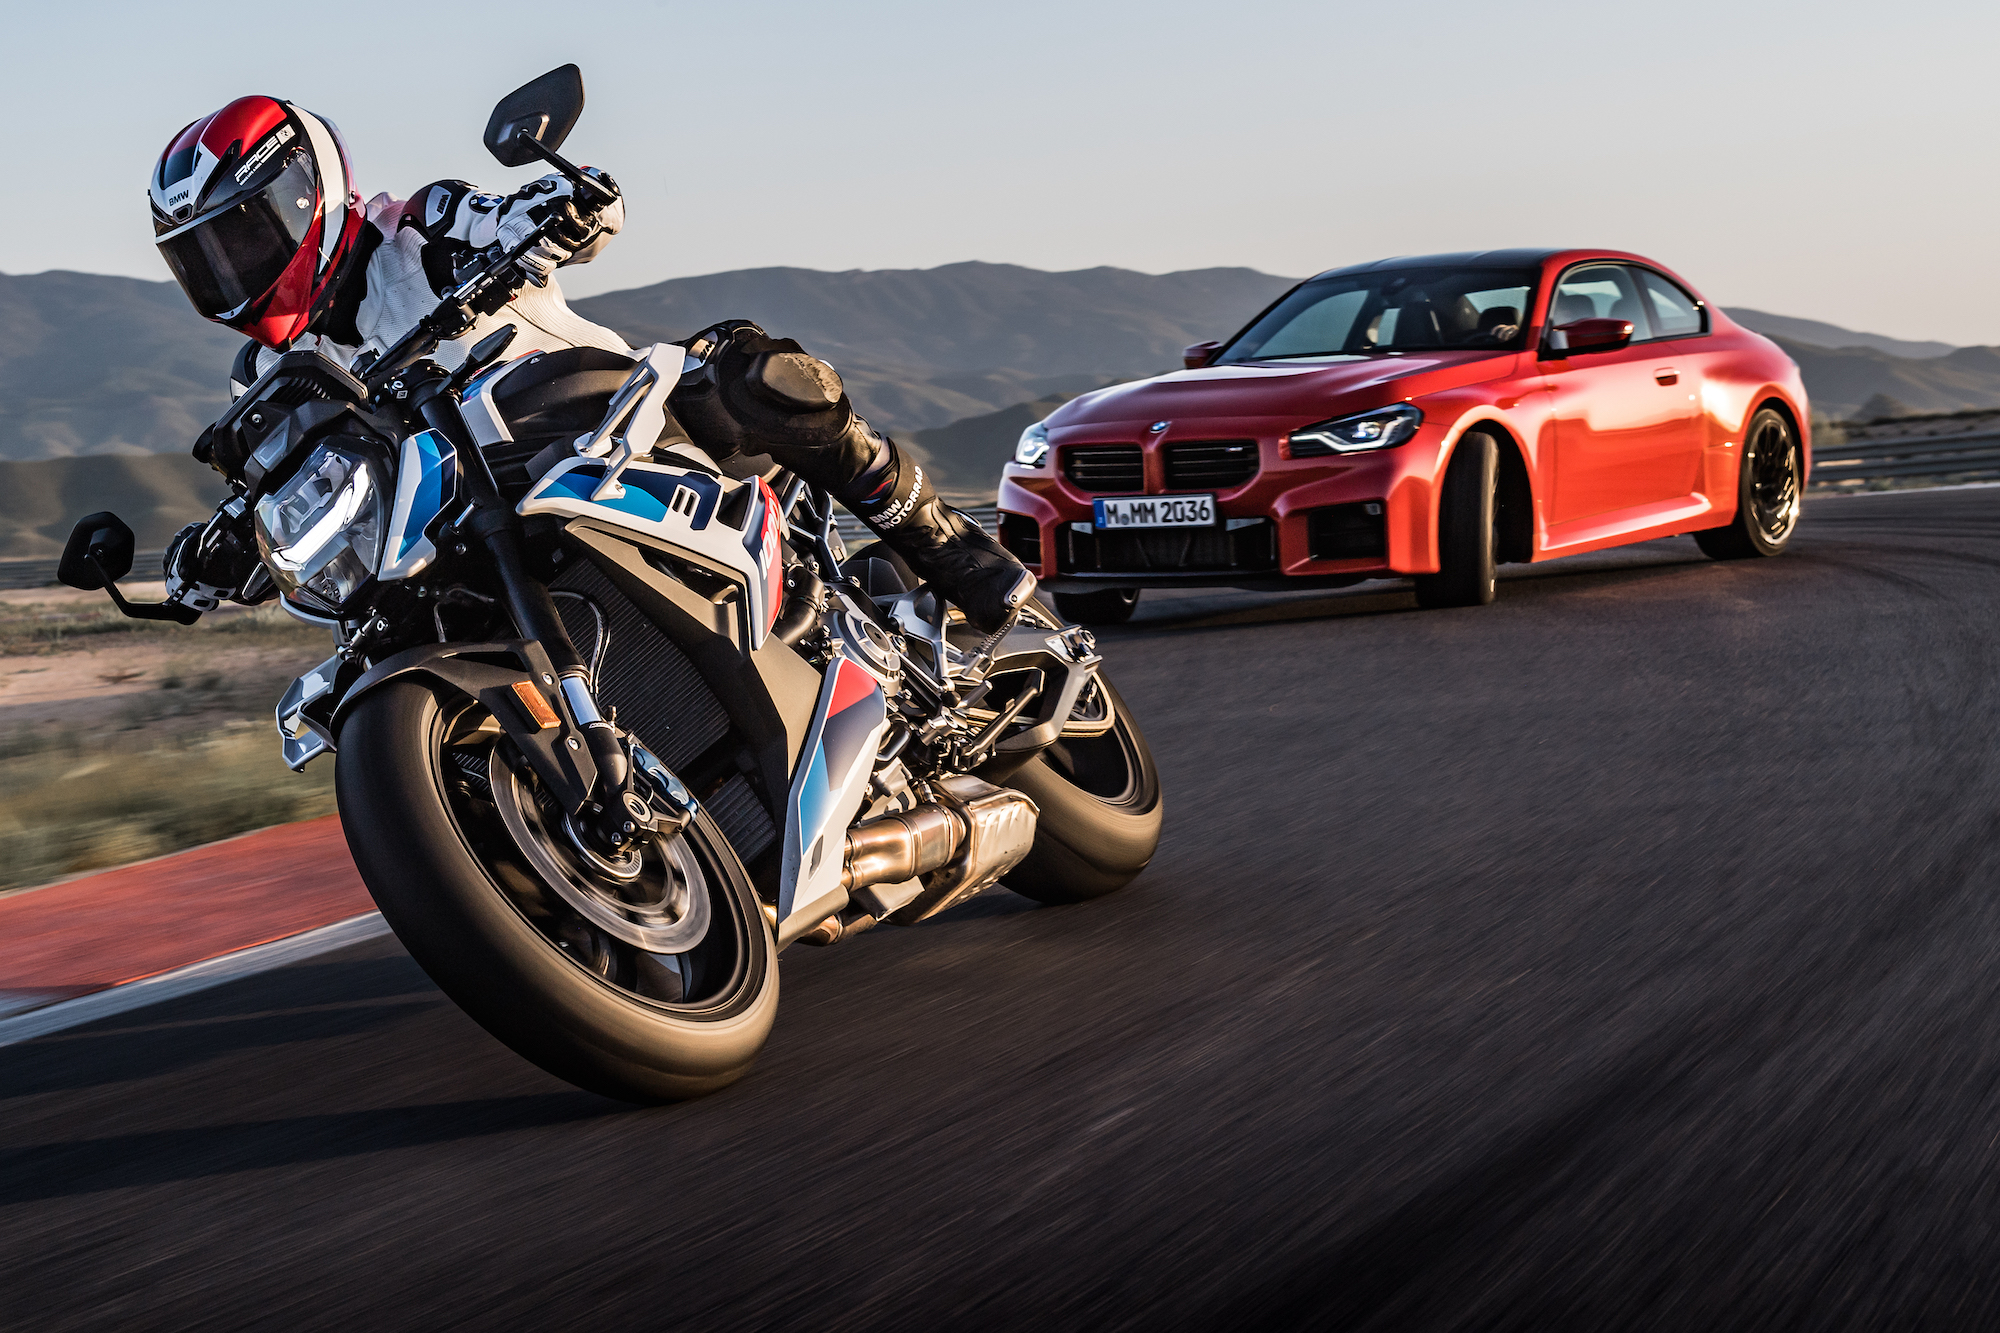 The BMW M 1000 R (MR) Roadster. Media sourced from BMW's press release on Newspress USA.